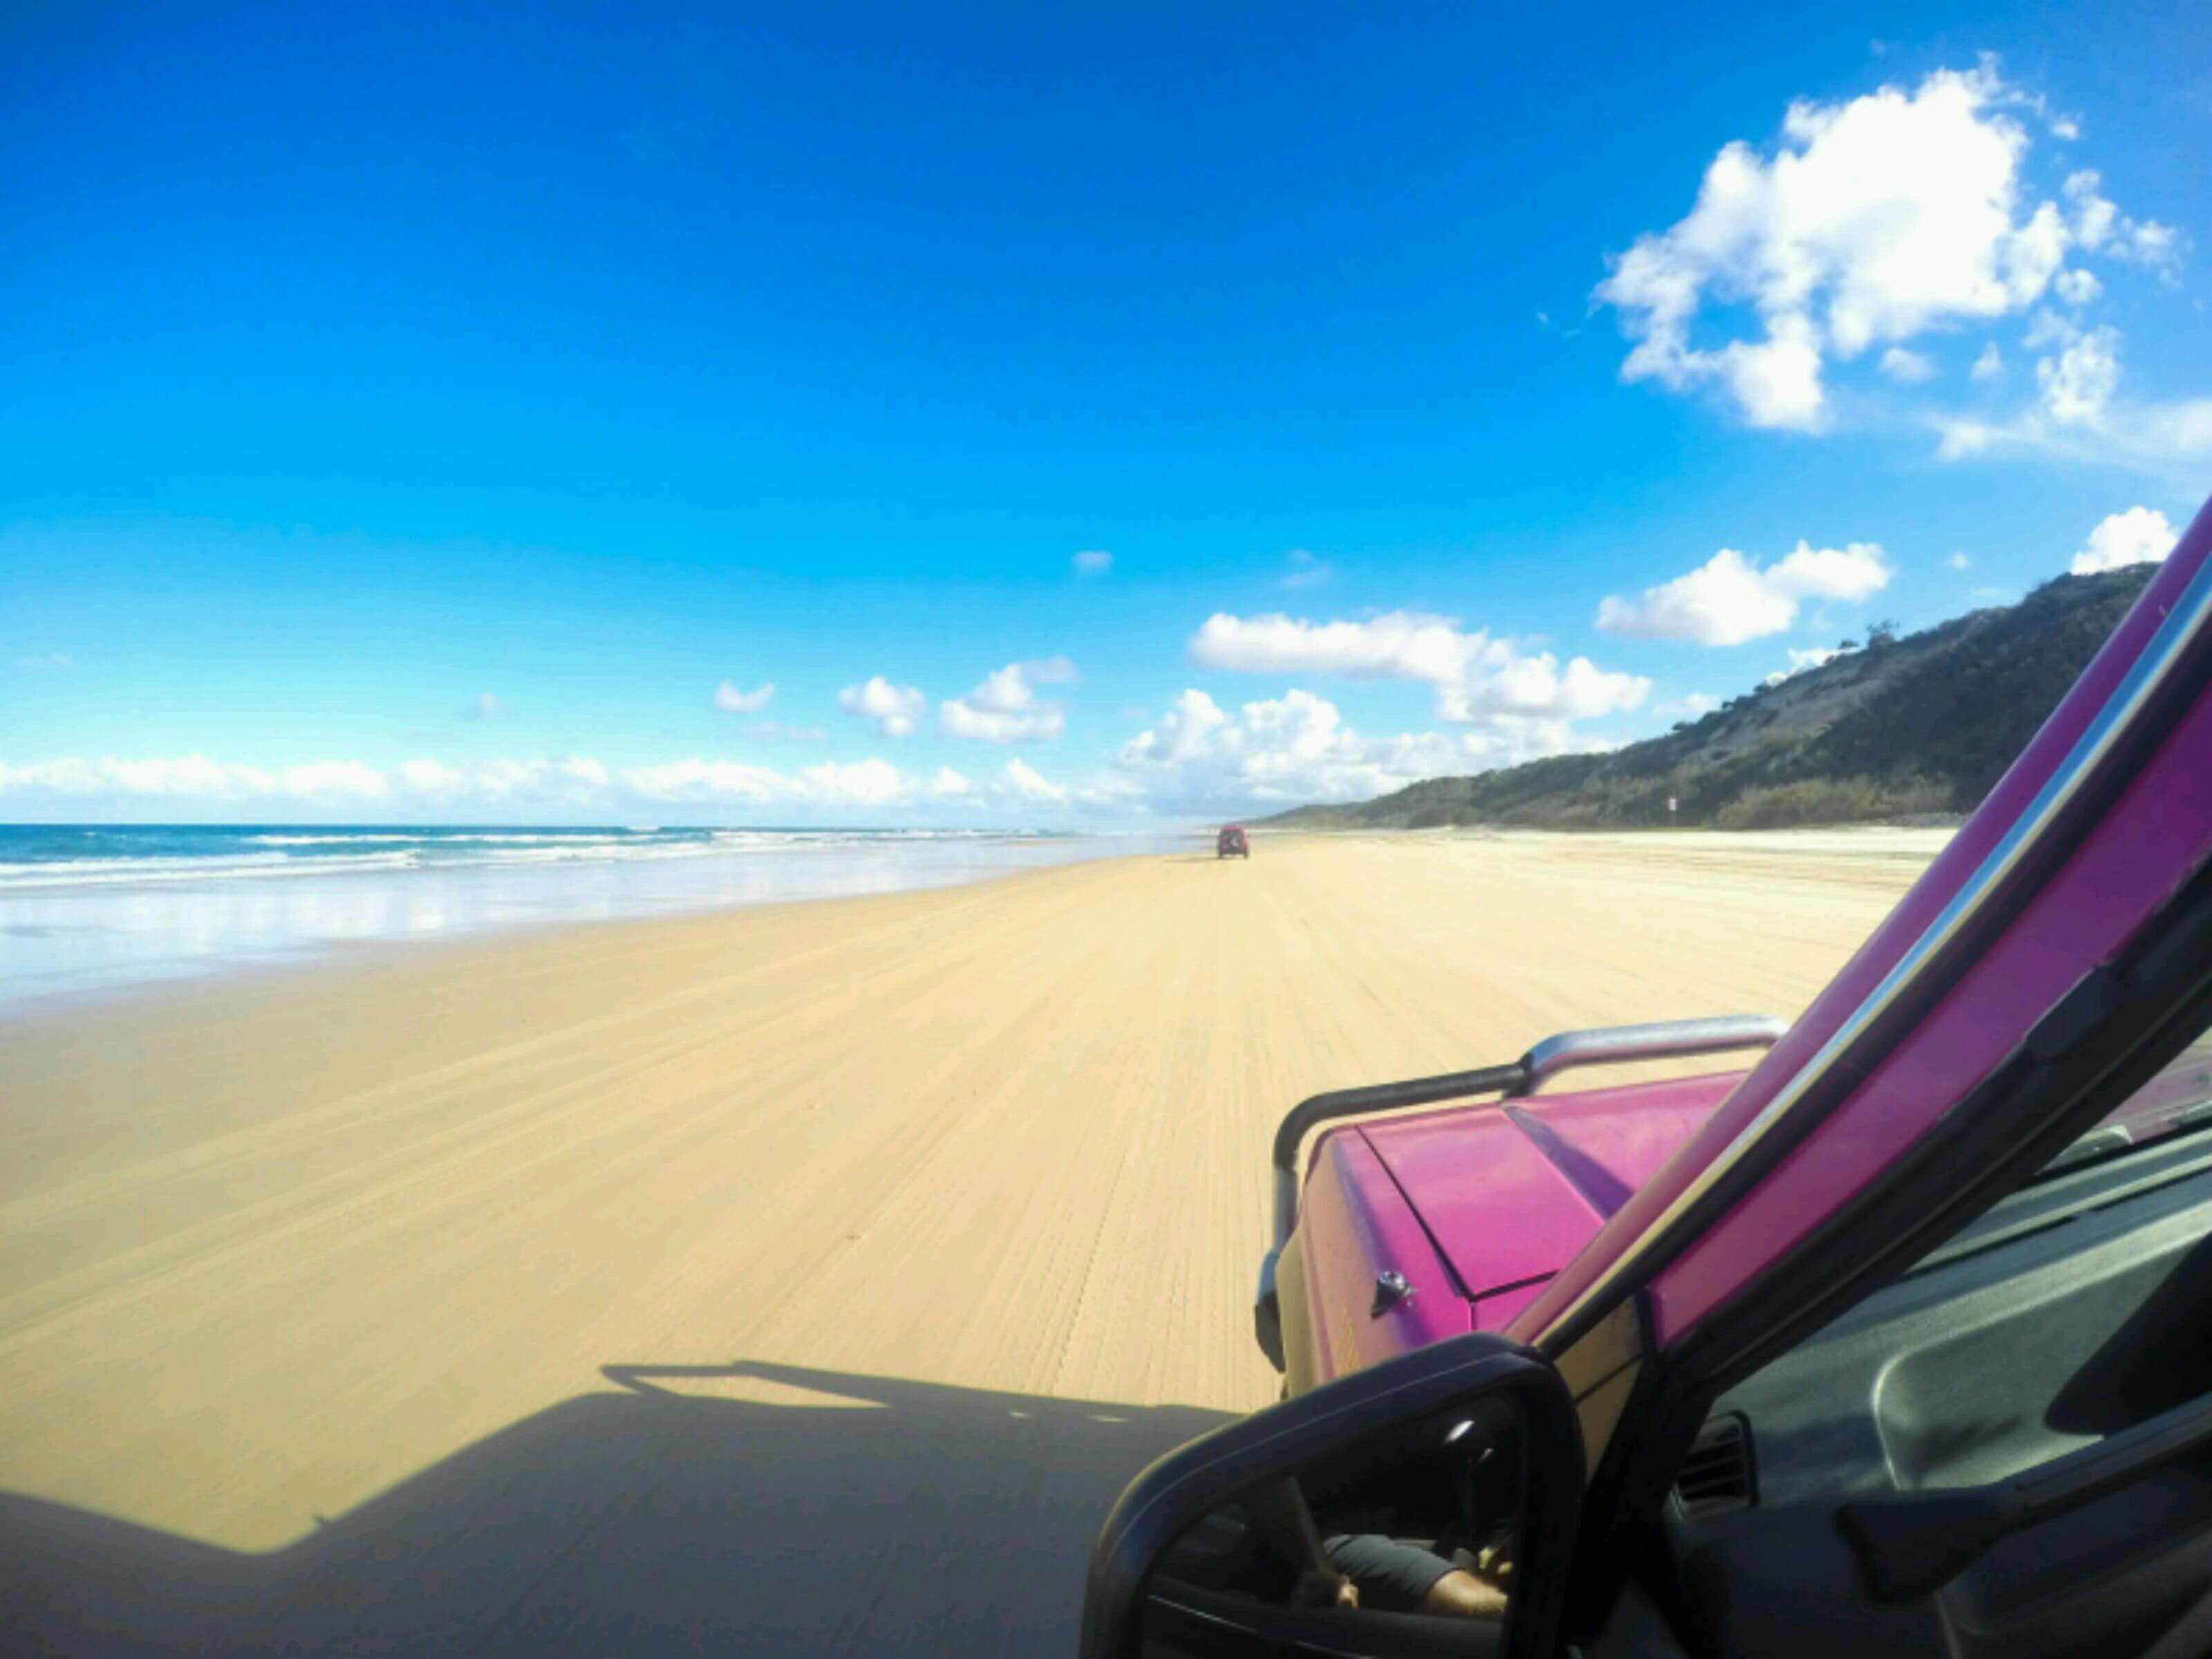 Cruising up 75 mile beach on Fraser Island in our pink 4x4